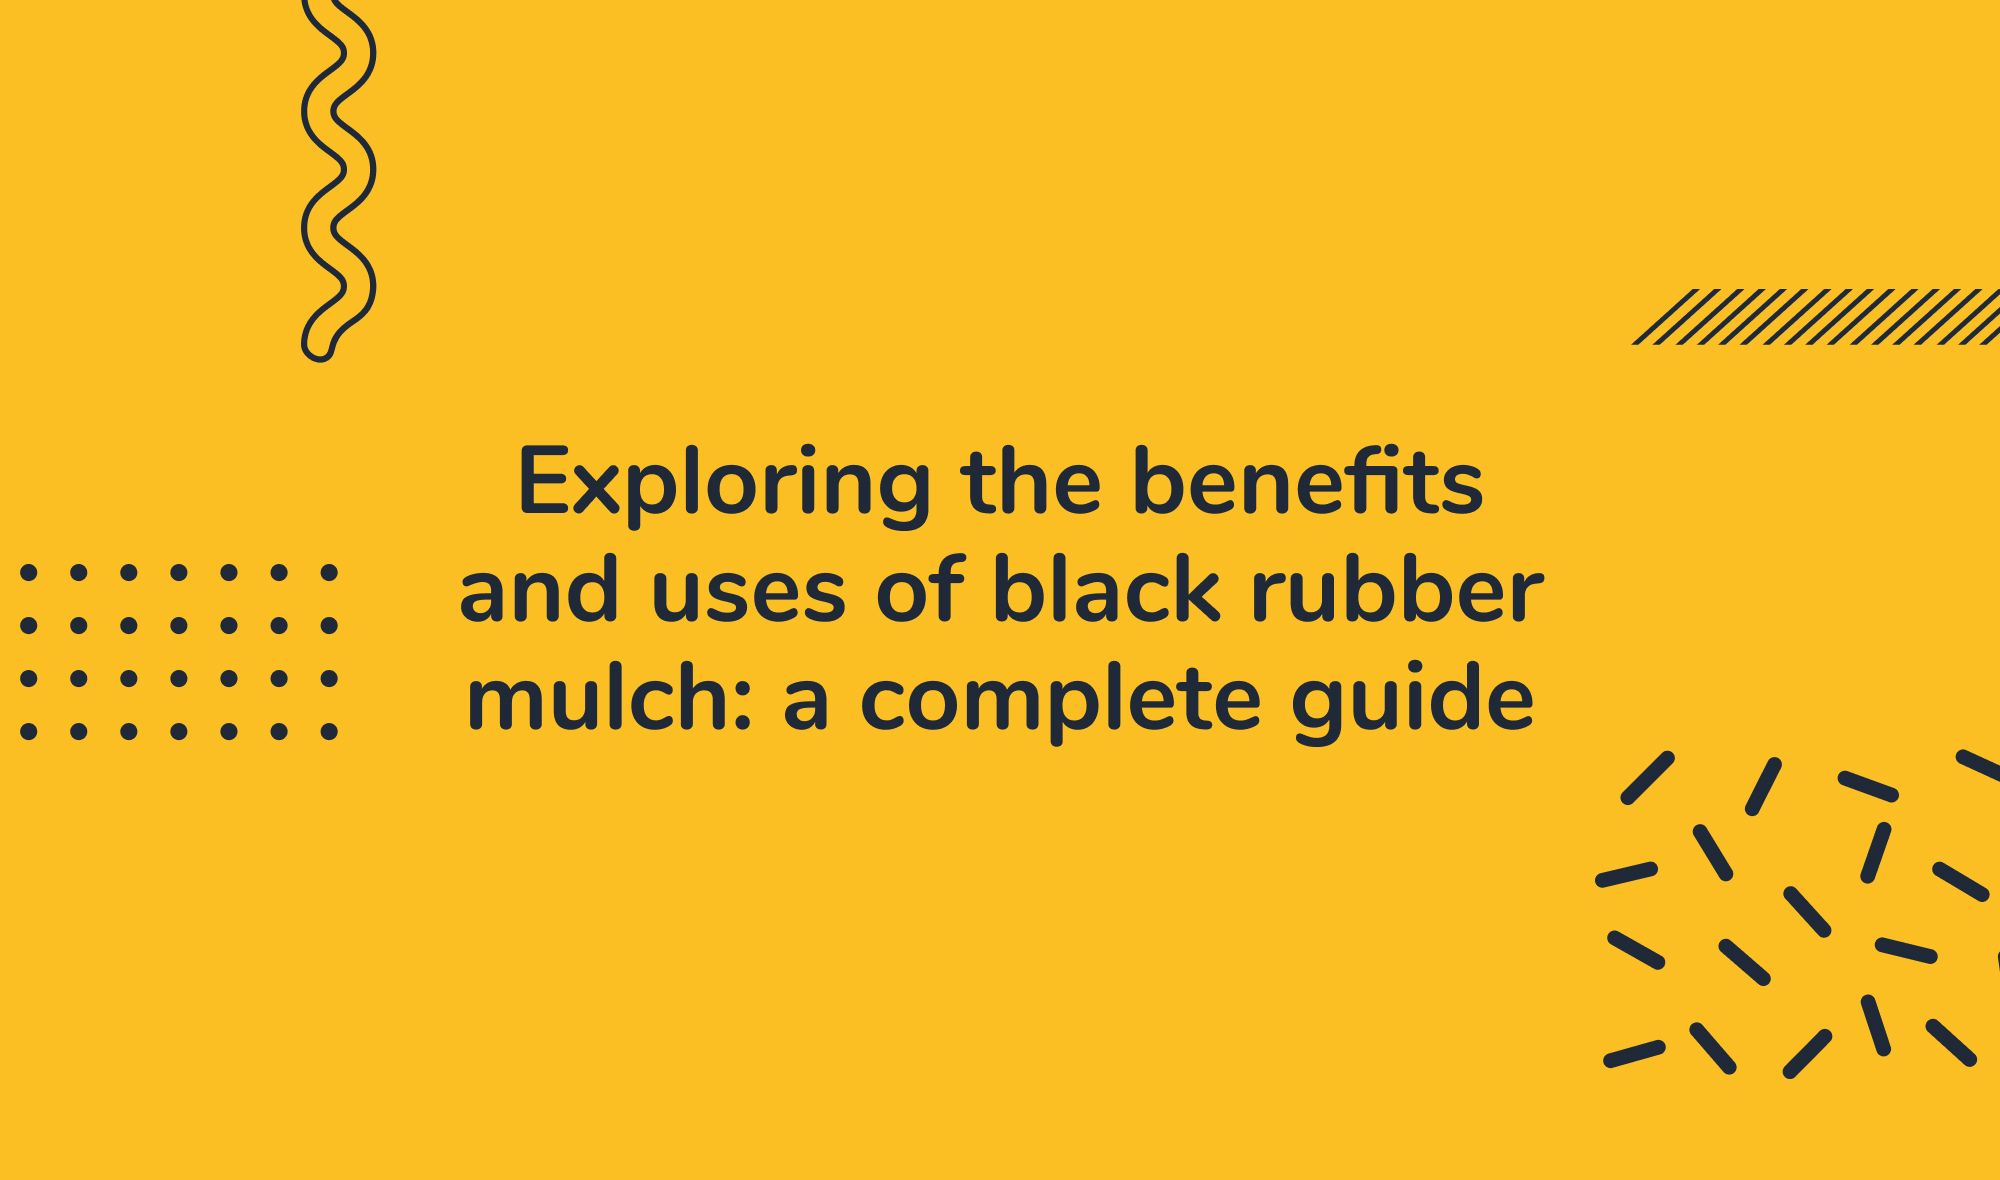 Exploring the benefits and uses of black rubber mulch: a complete guide